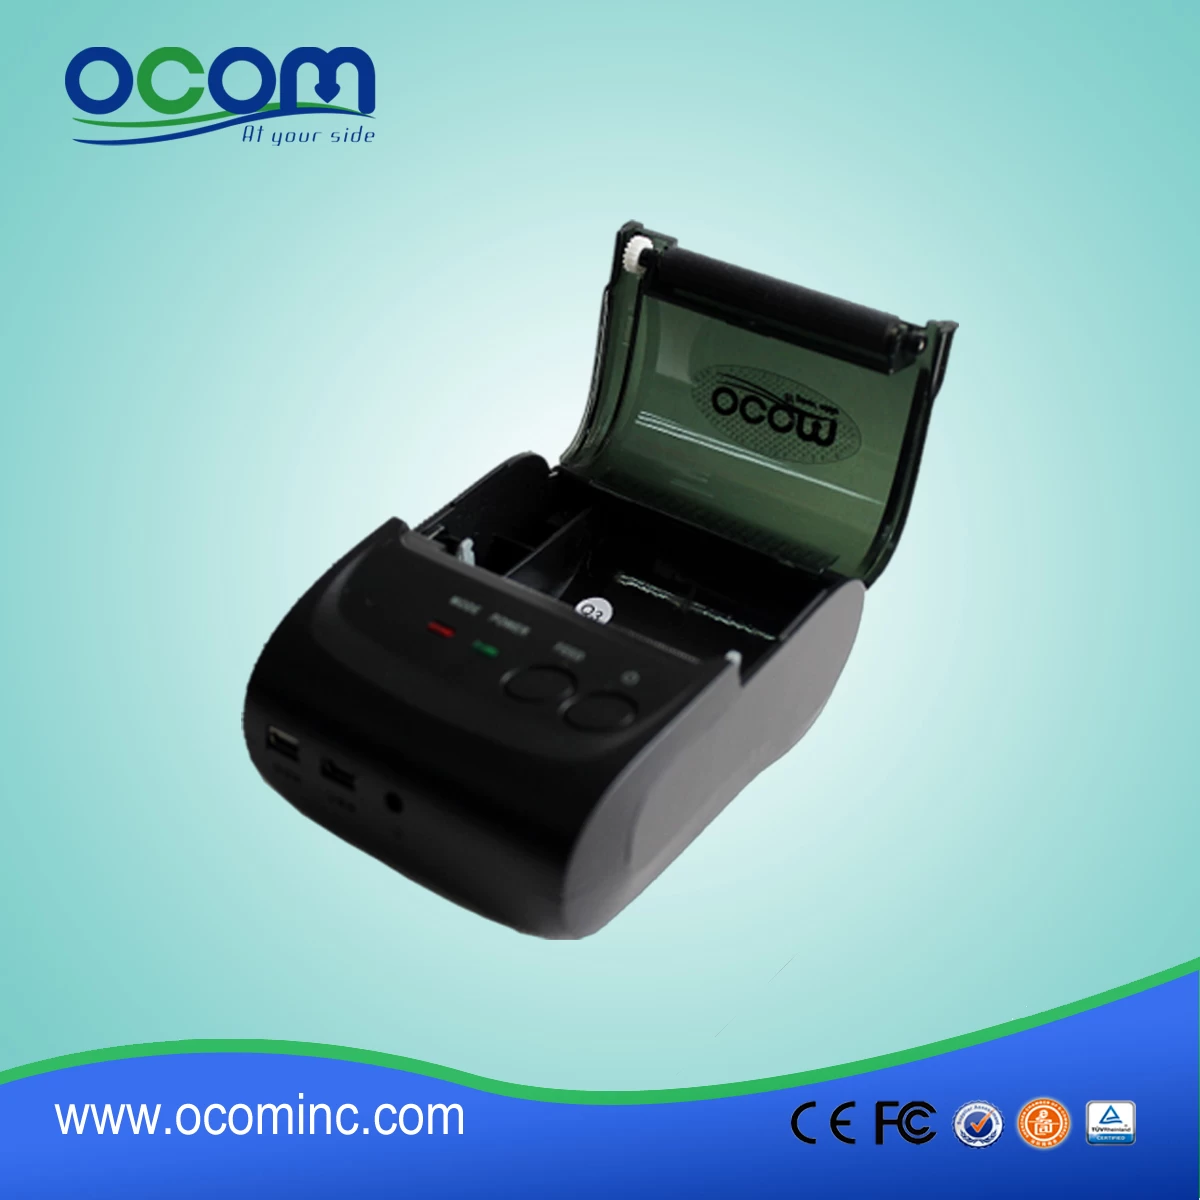 58mm Mini Bluetooth Thermal Printer for Android or iOS